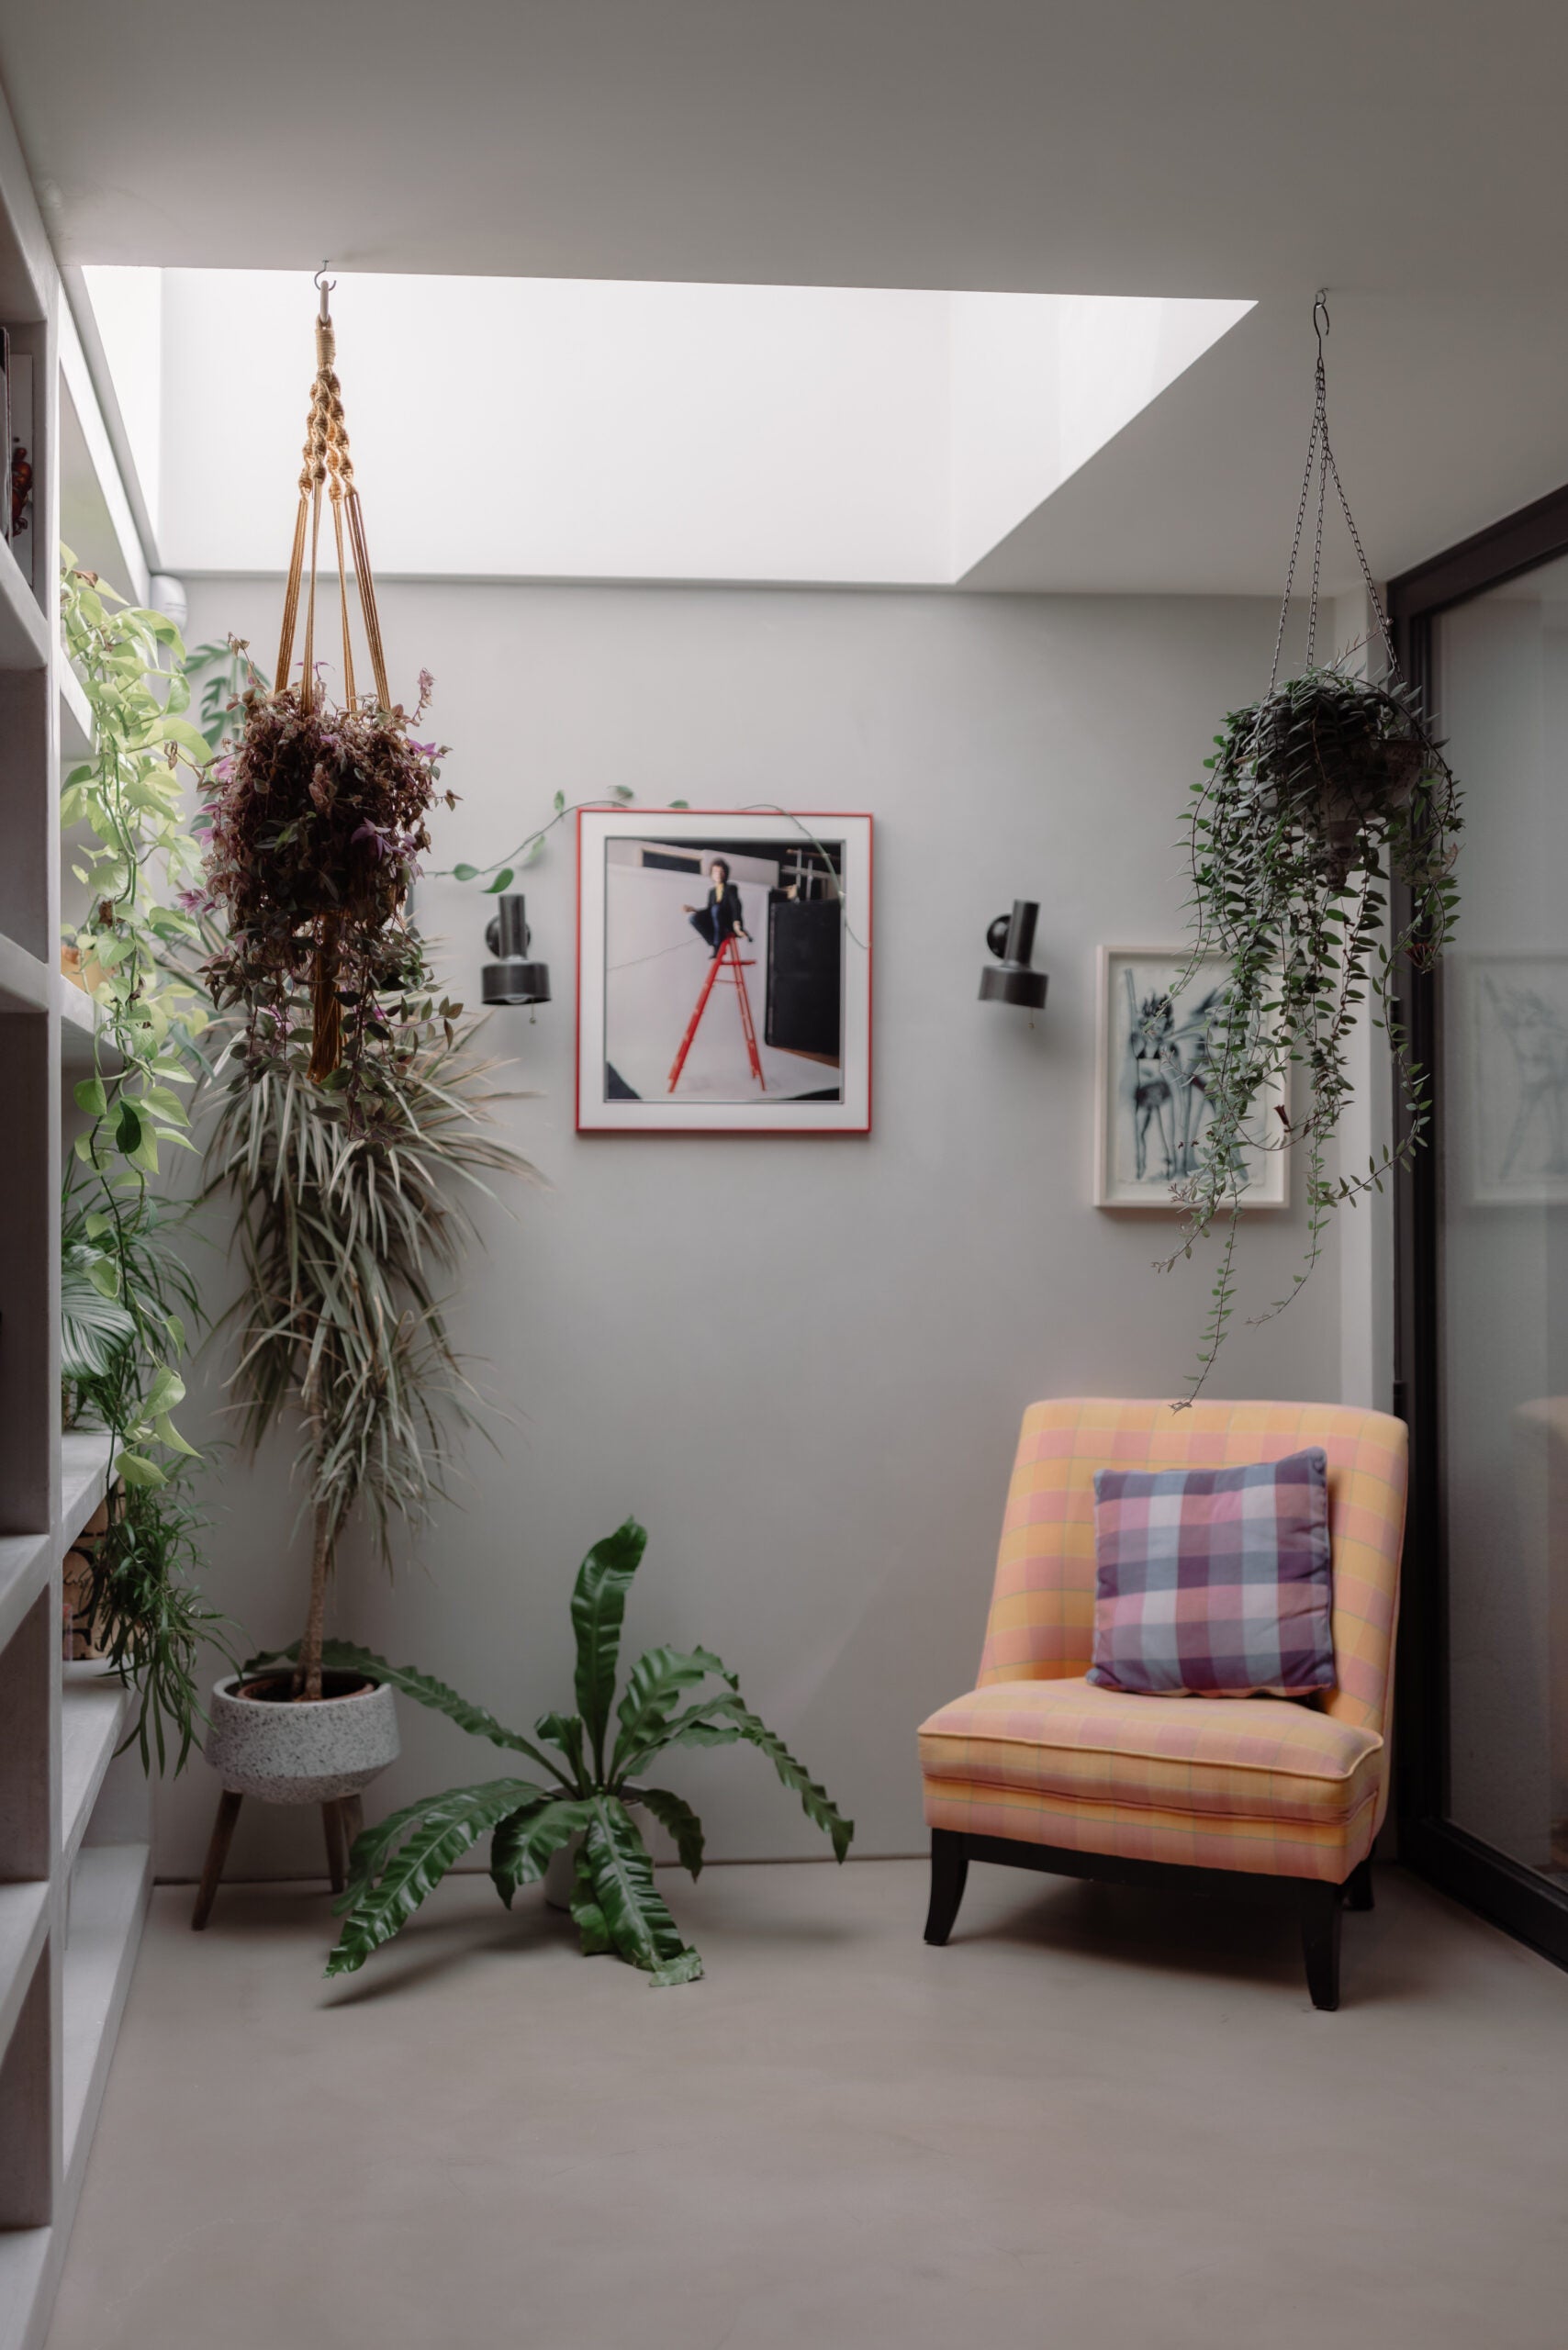 Christie's plant-filled nook